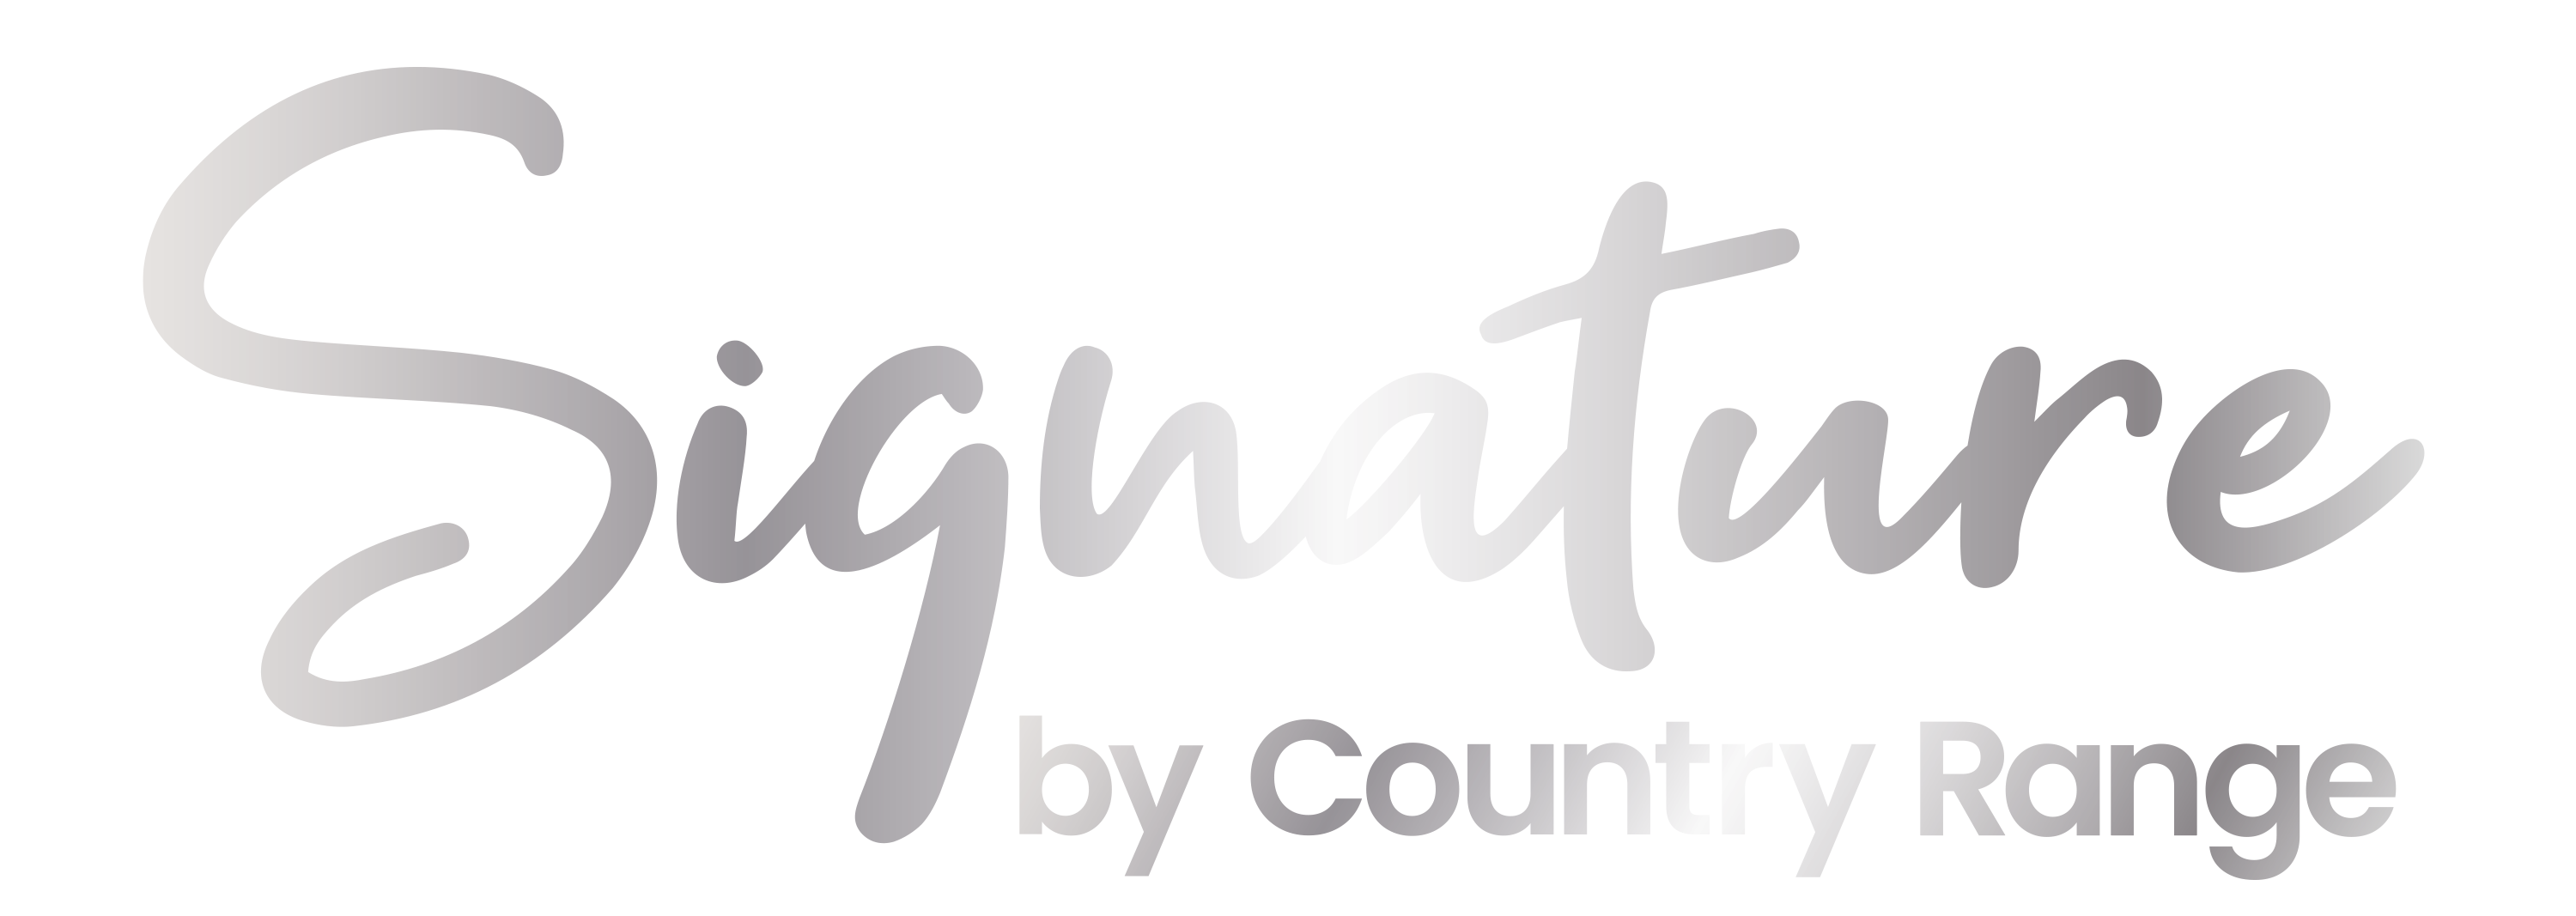 Signature by Country Range logo